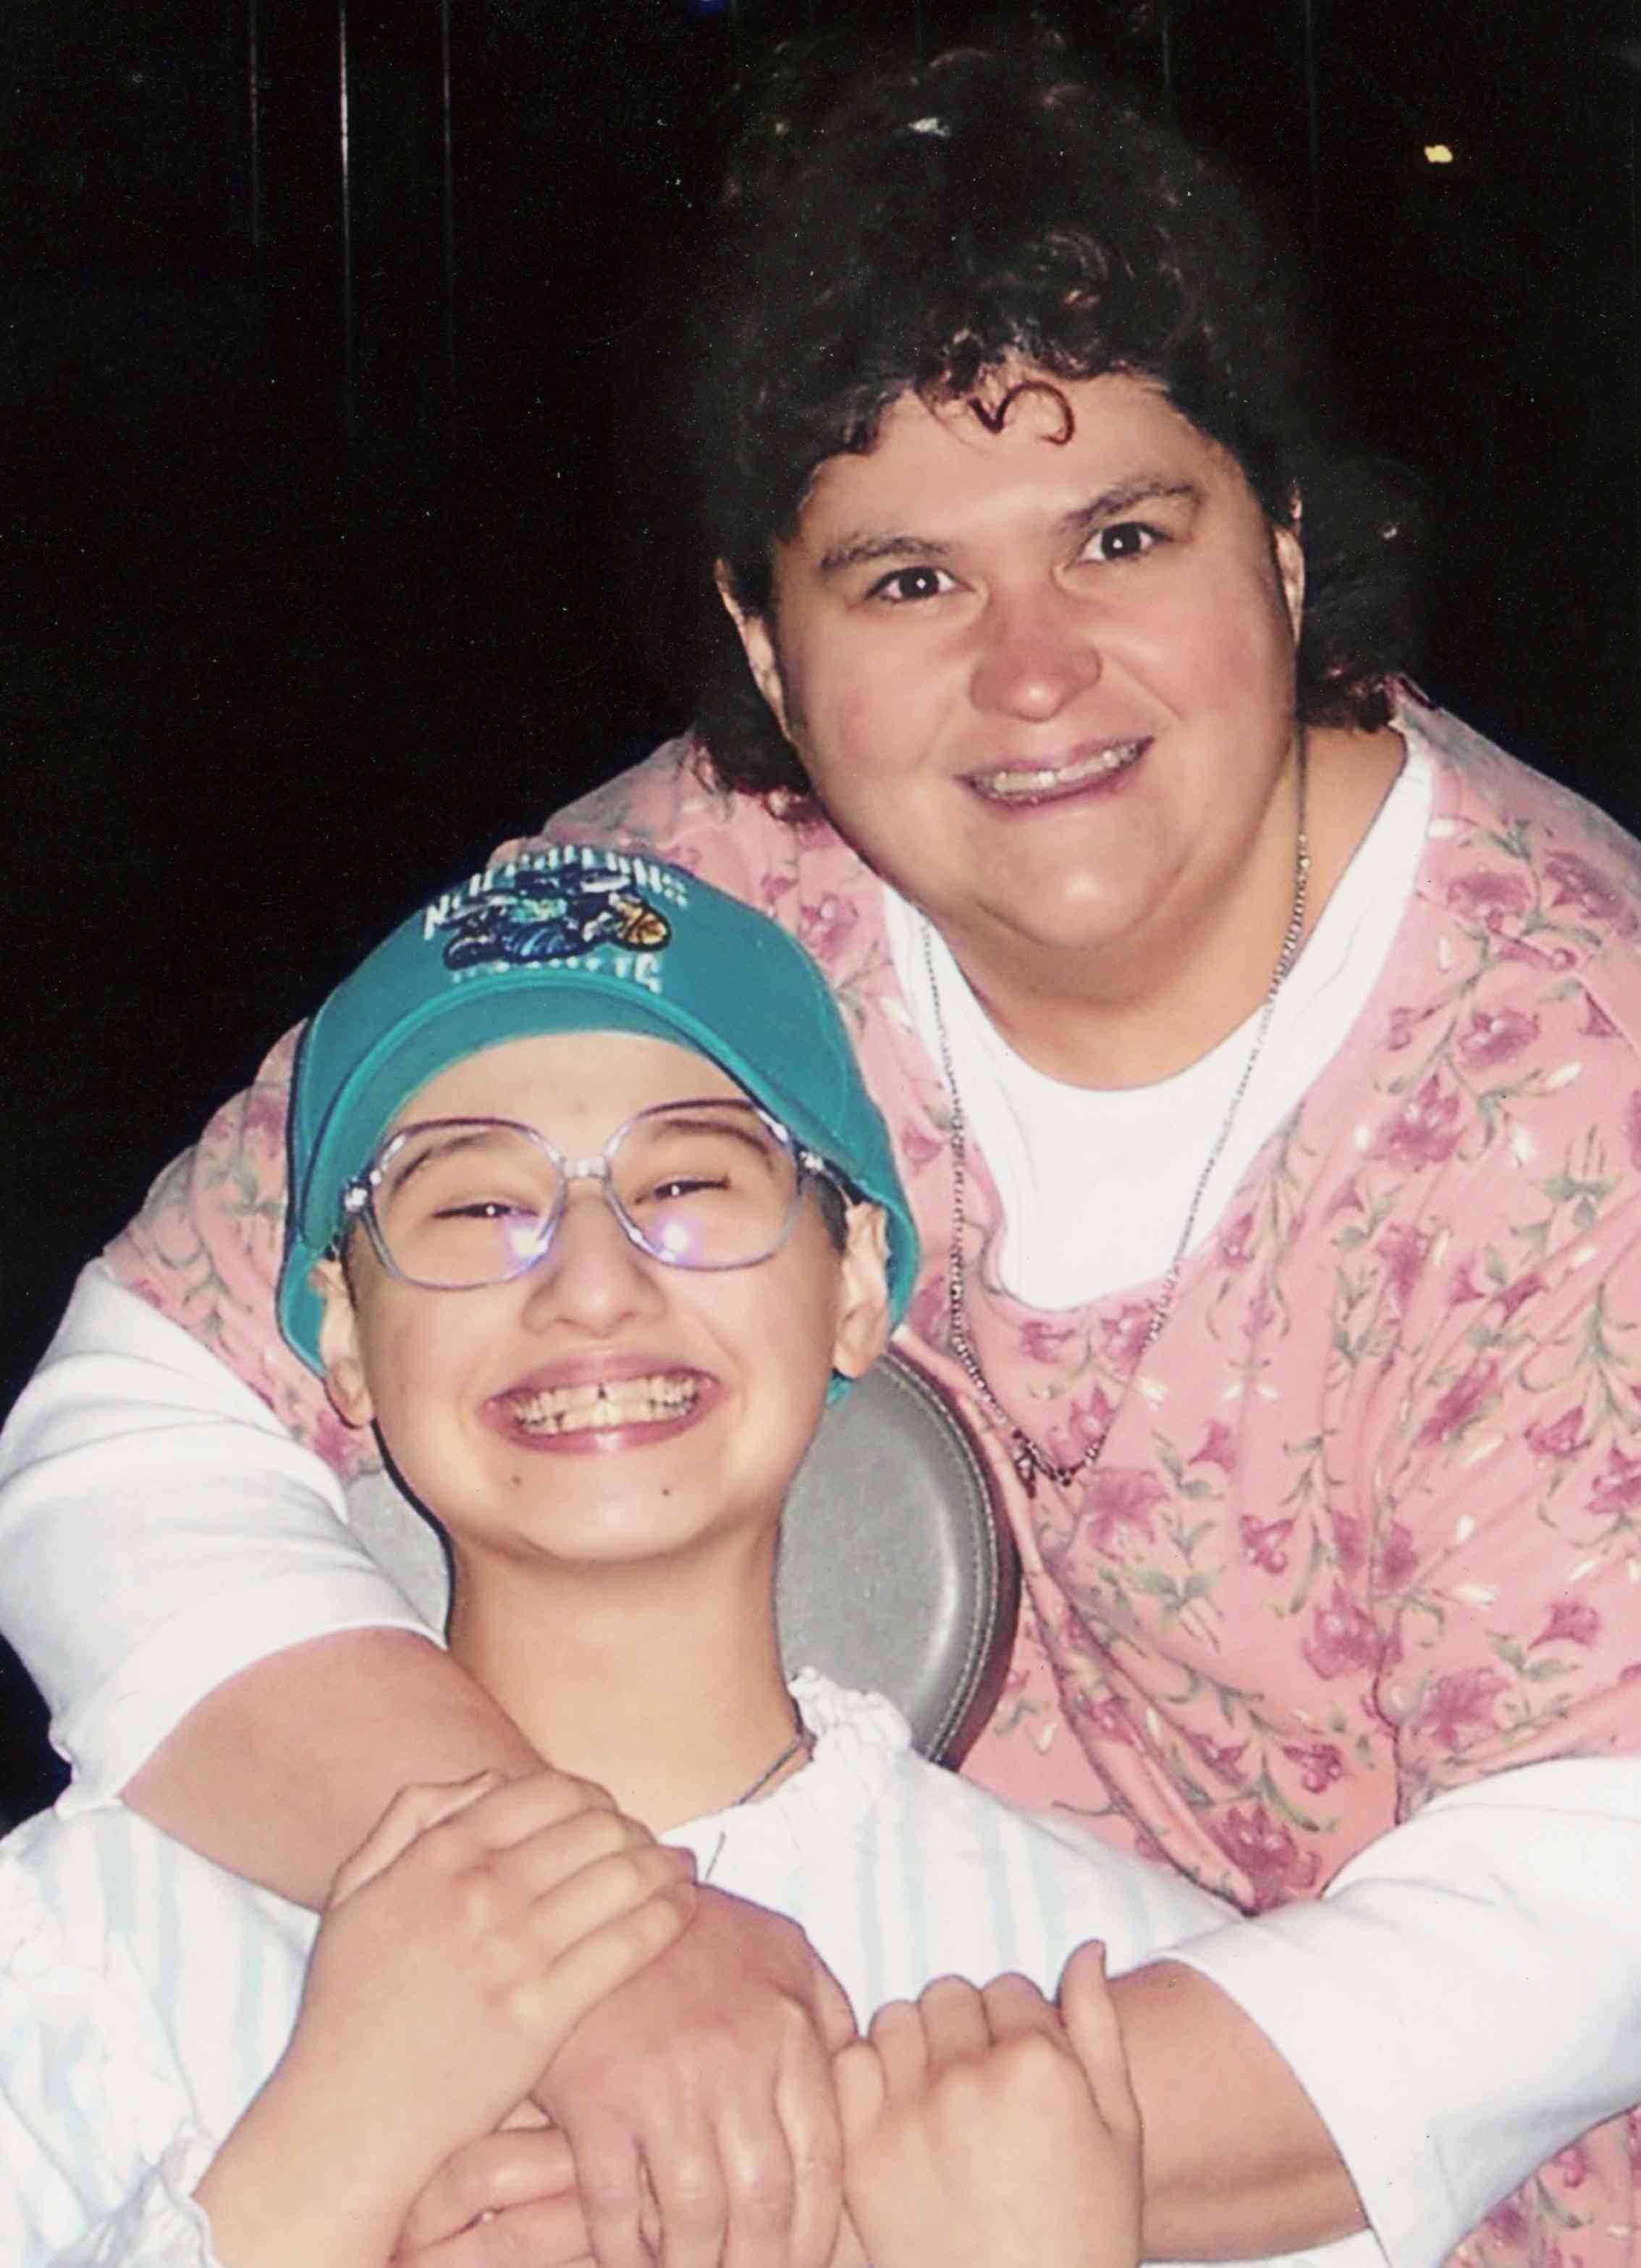 Gypsy Rose Blanchard: the Lifetime documentary to be released on Jan. 5 2024 "The Prison Confessions of Gypsy Rose Blanchard" about her life in prison, her engagement to one man and marriage to another.